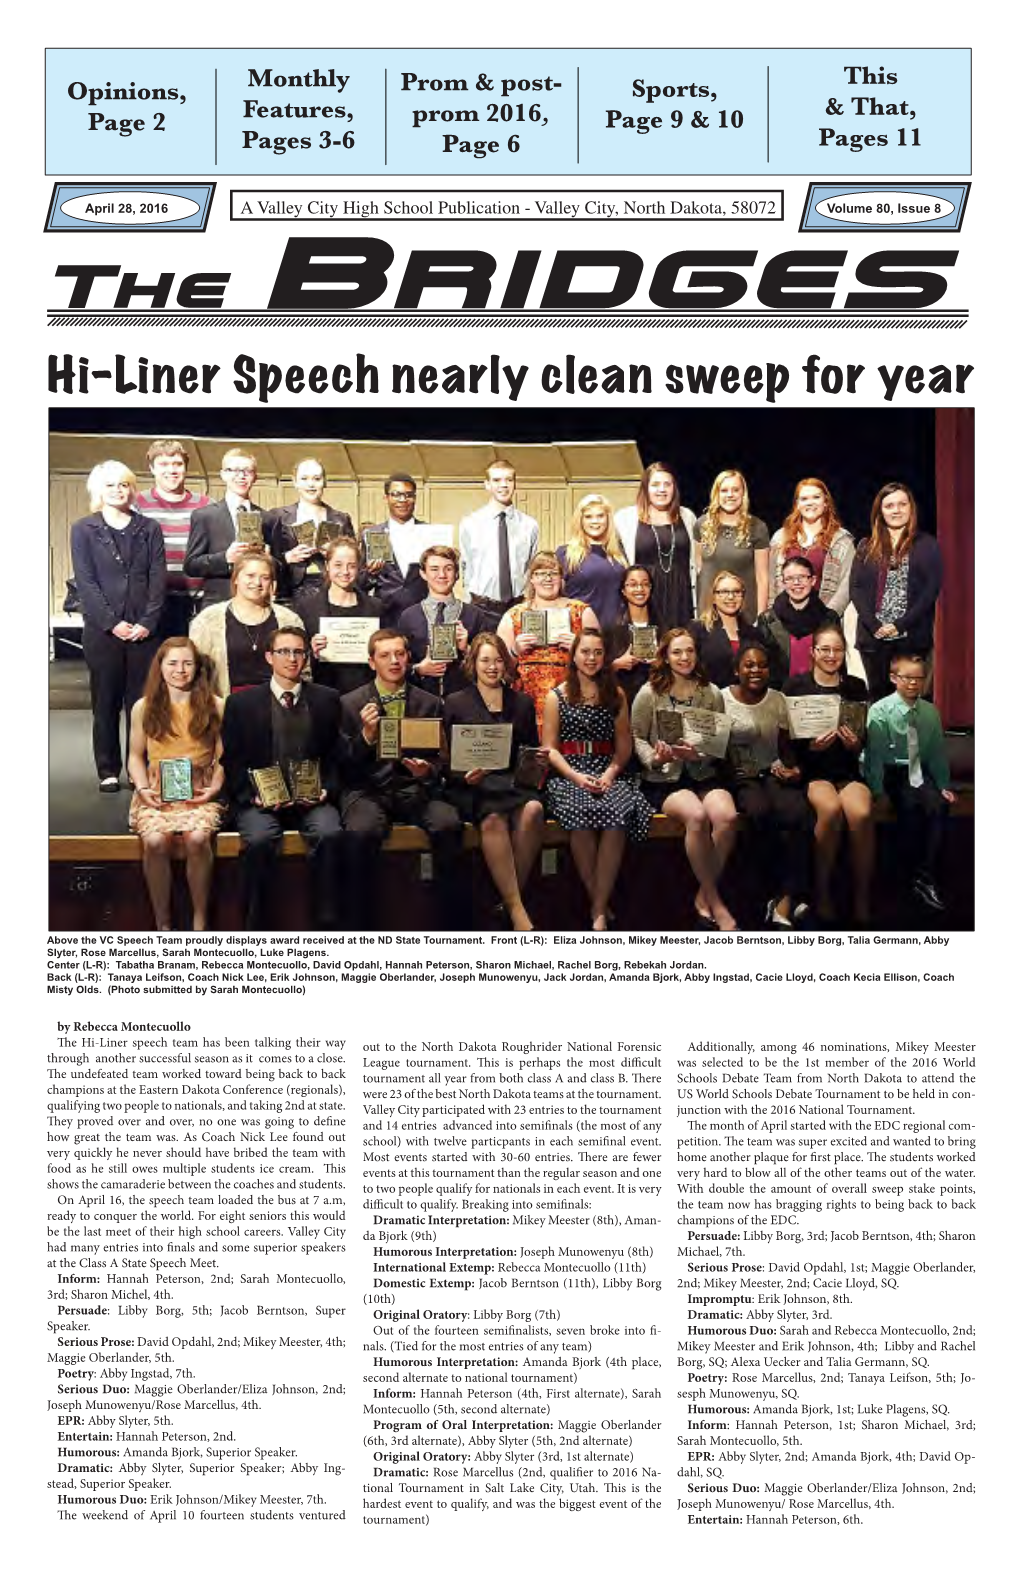 Hi-Liner Speech Nearly Clean Sweep for Year